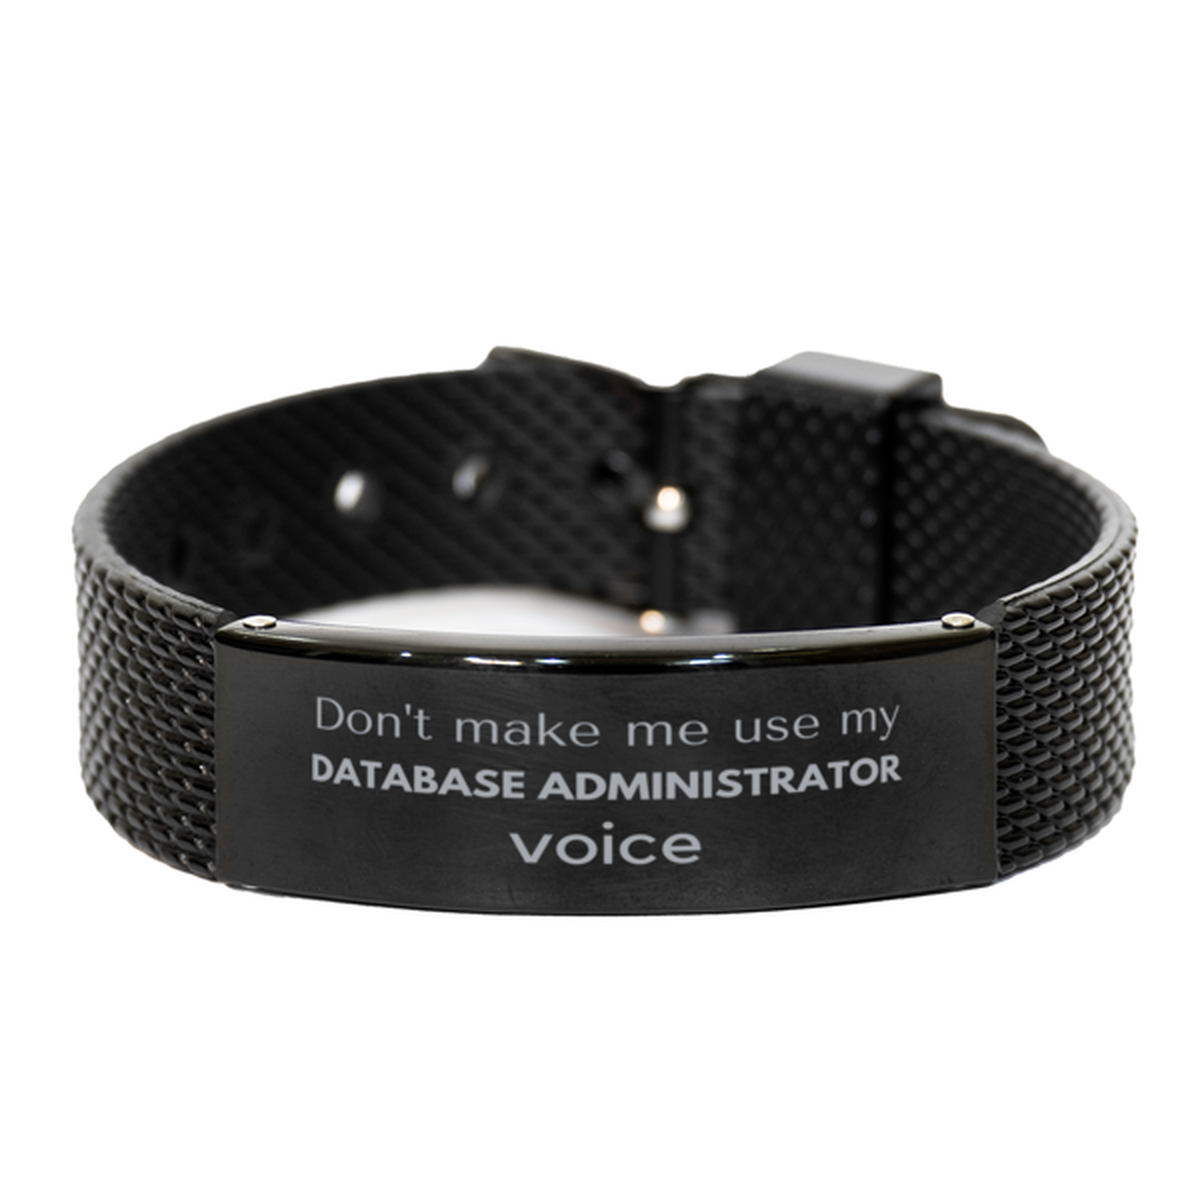 Don't make me use my Database Administrator voice, Sarcasm Database Administrator Gifts, Christmas Database Administrator Black Shark Mesh Bracelet Birthday Unique Gifts For Database Administrator Coworkers, Men, Women, Colleague, Friends